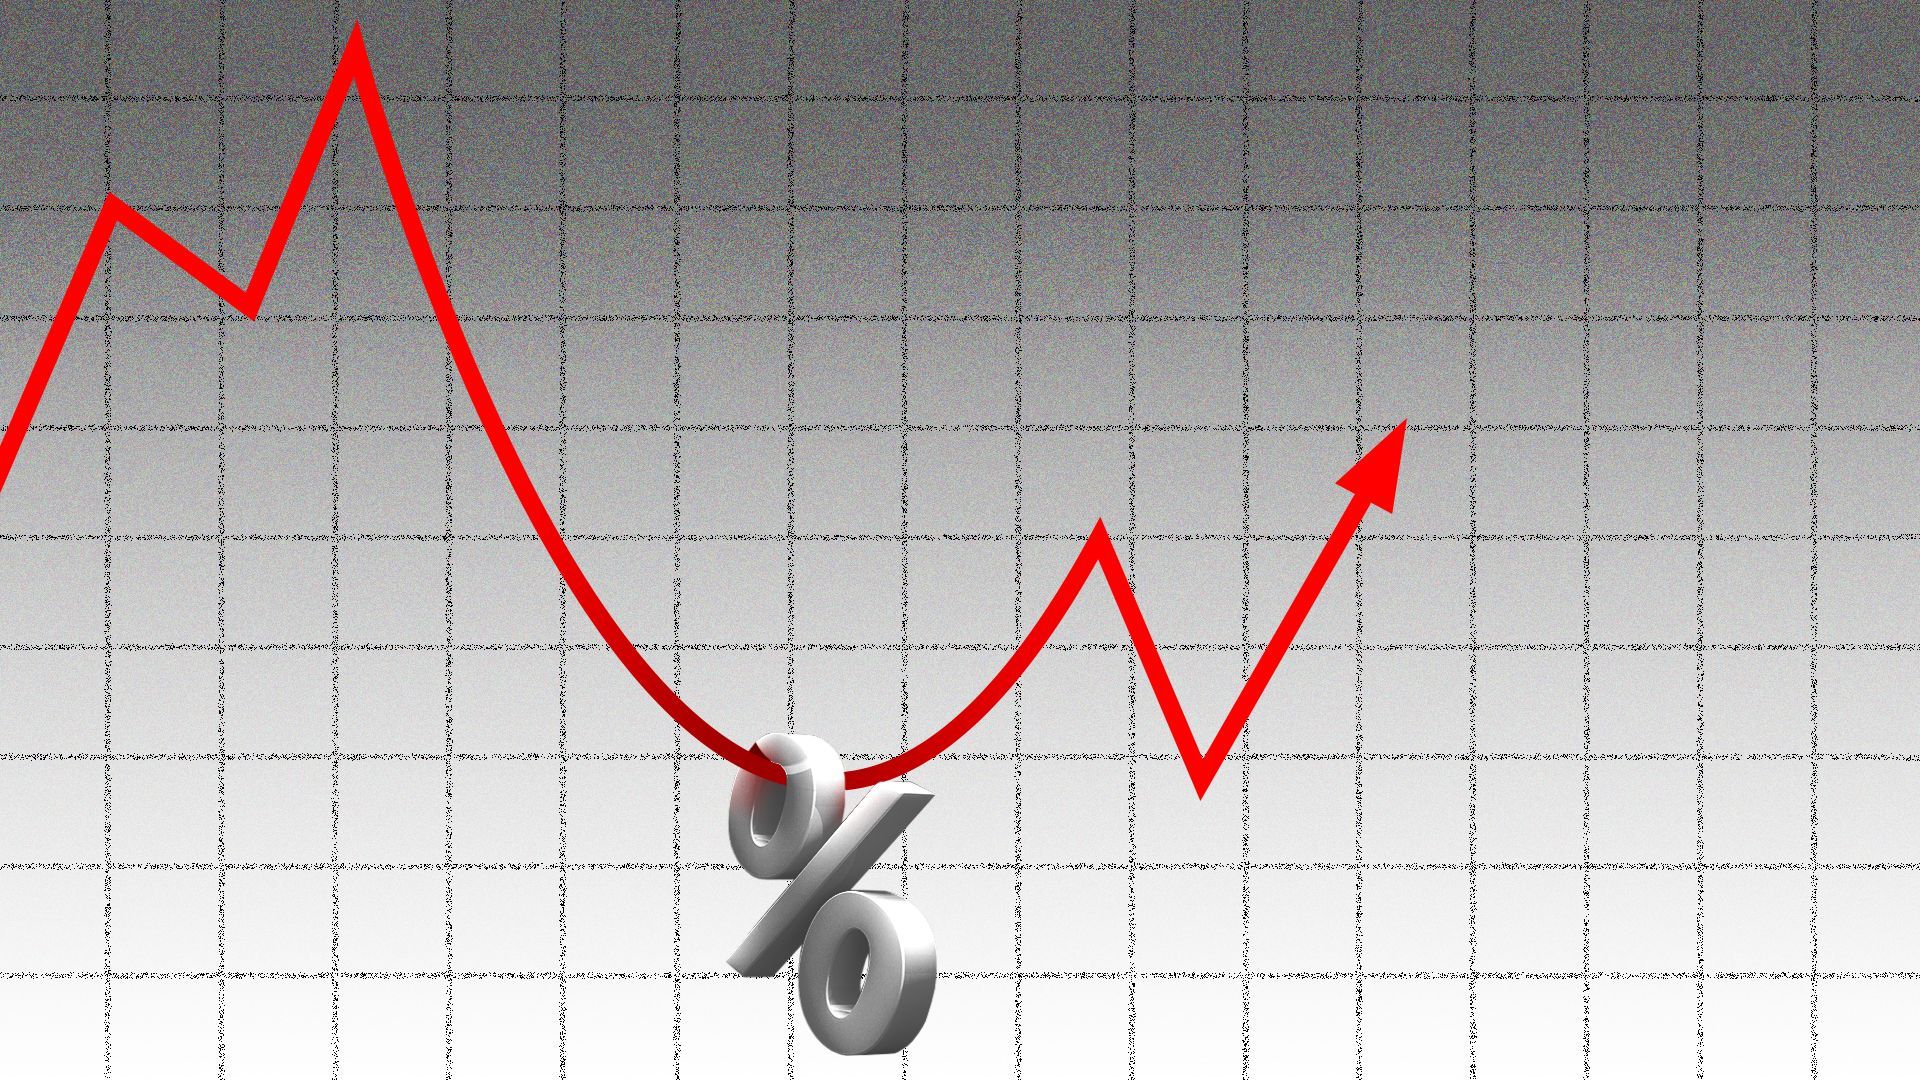 Illustration of a stock trend line being pulled down by a heavy, metal percentage symbol